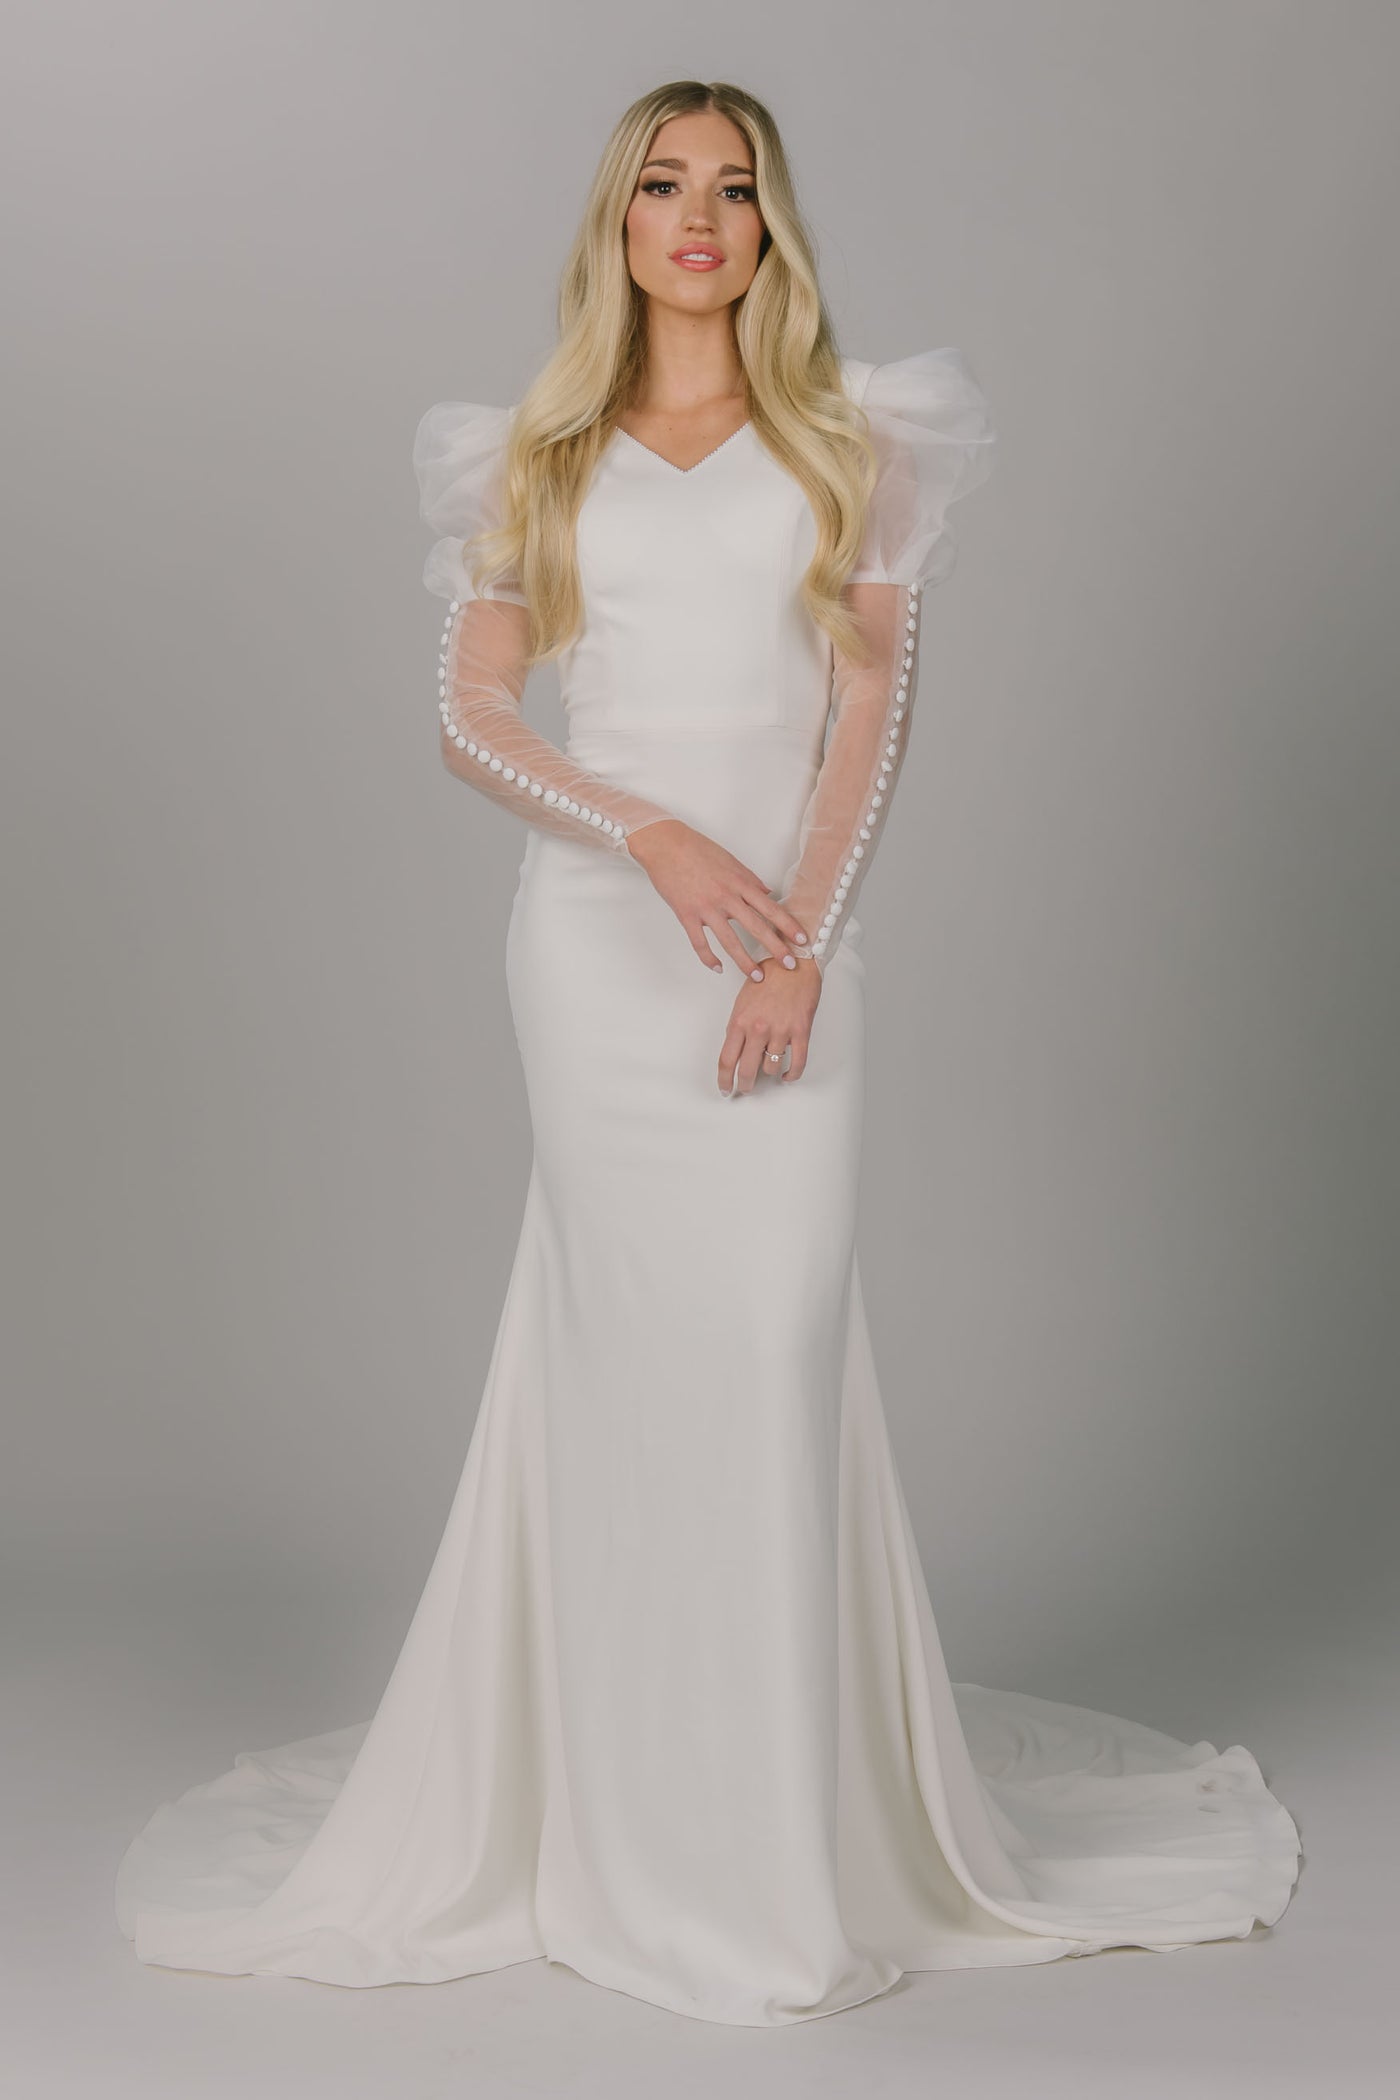 A front shot of a modest wedding dress with a v-neck, long puff sleeves, and a fitted silhouette.